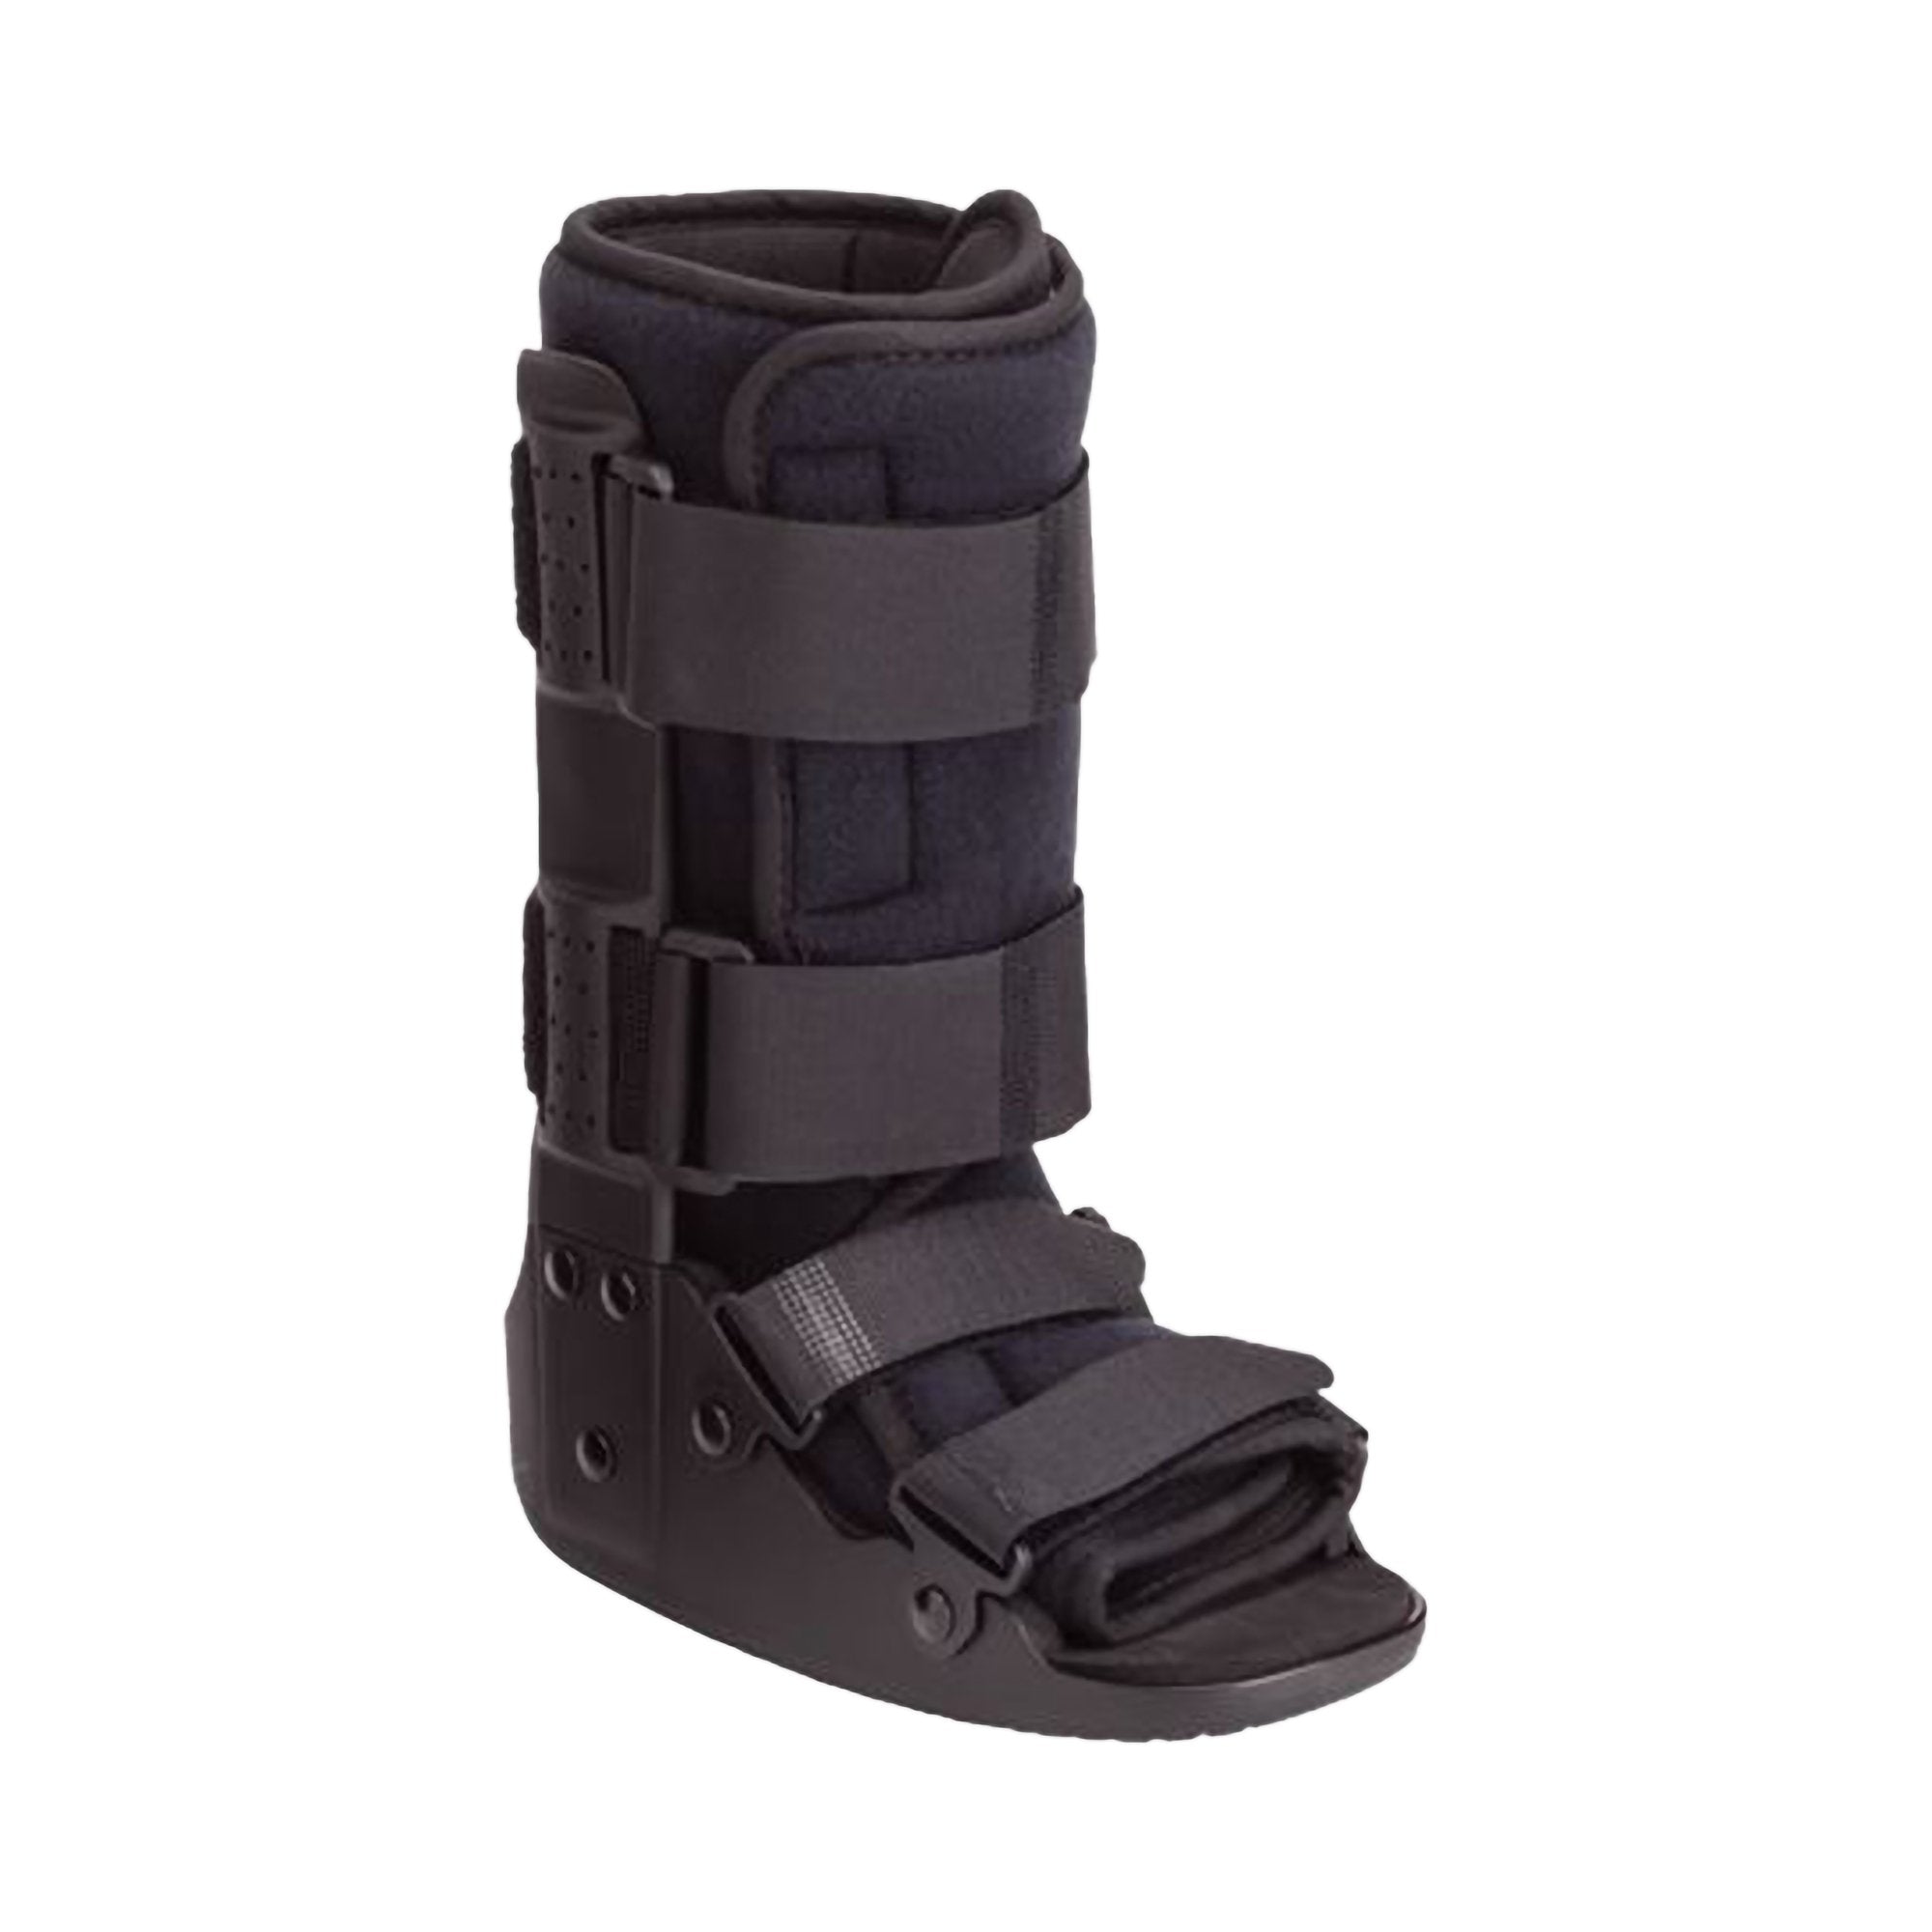 Walker Boot Ossur® Non-Pneumatic Large Left or Right Foot Pediatric